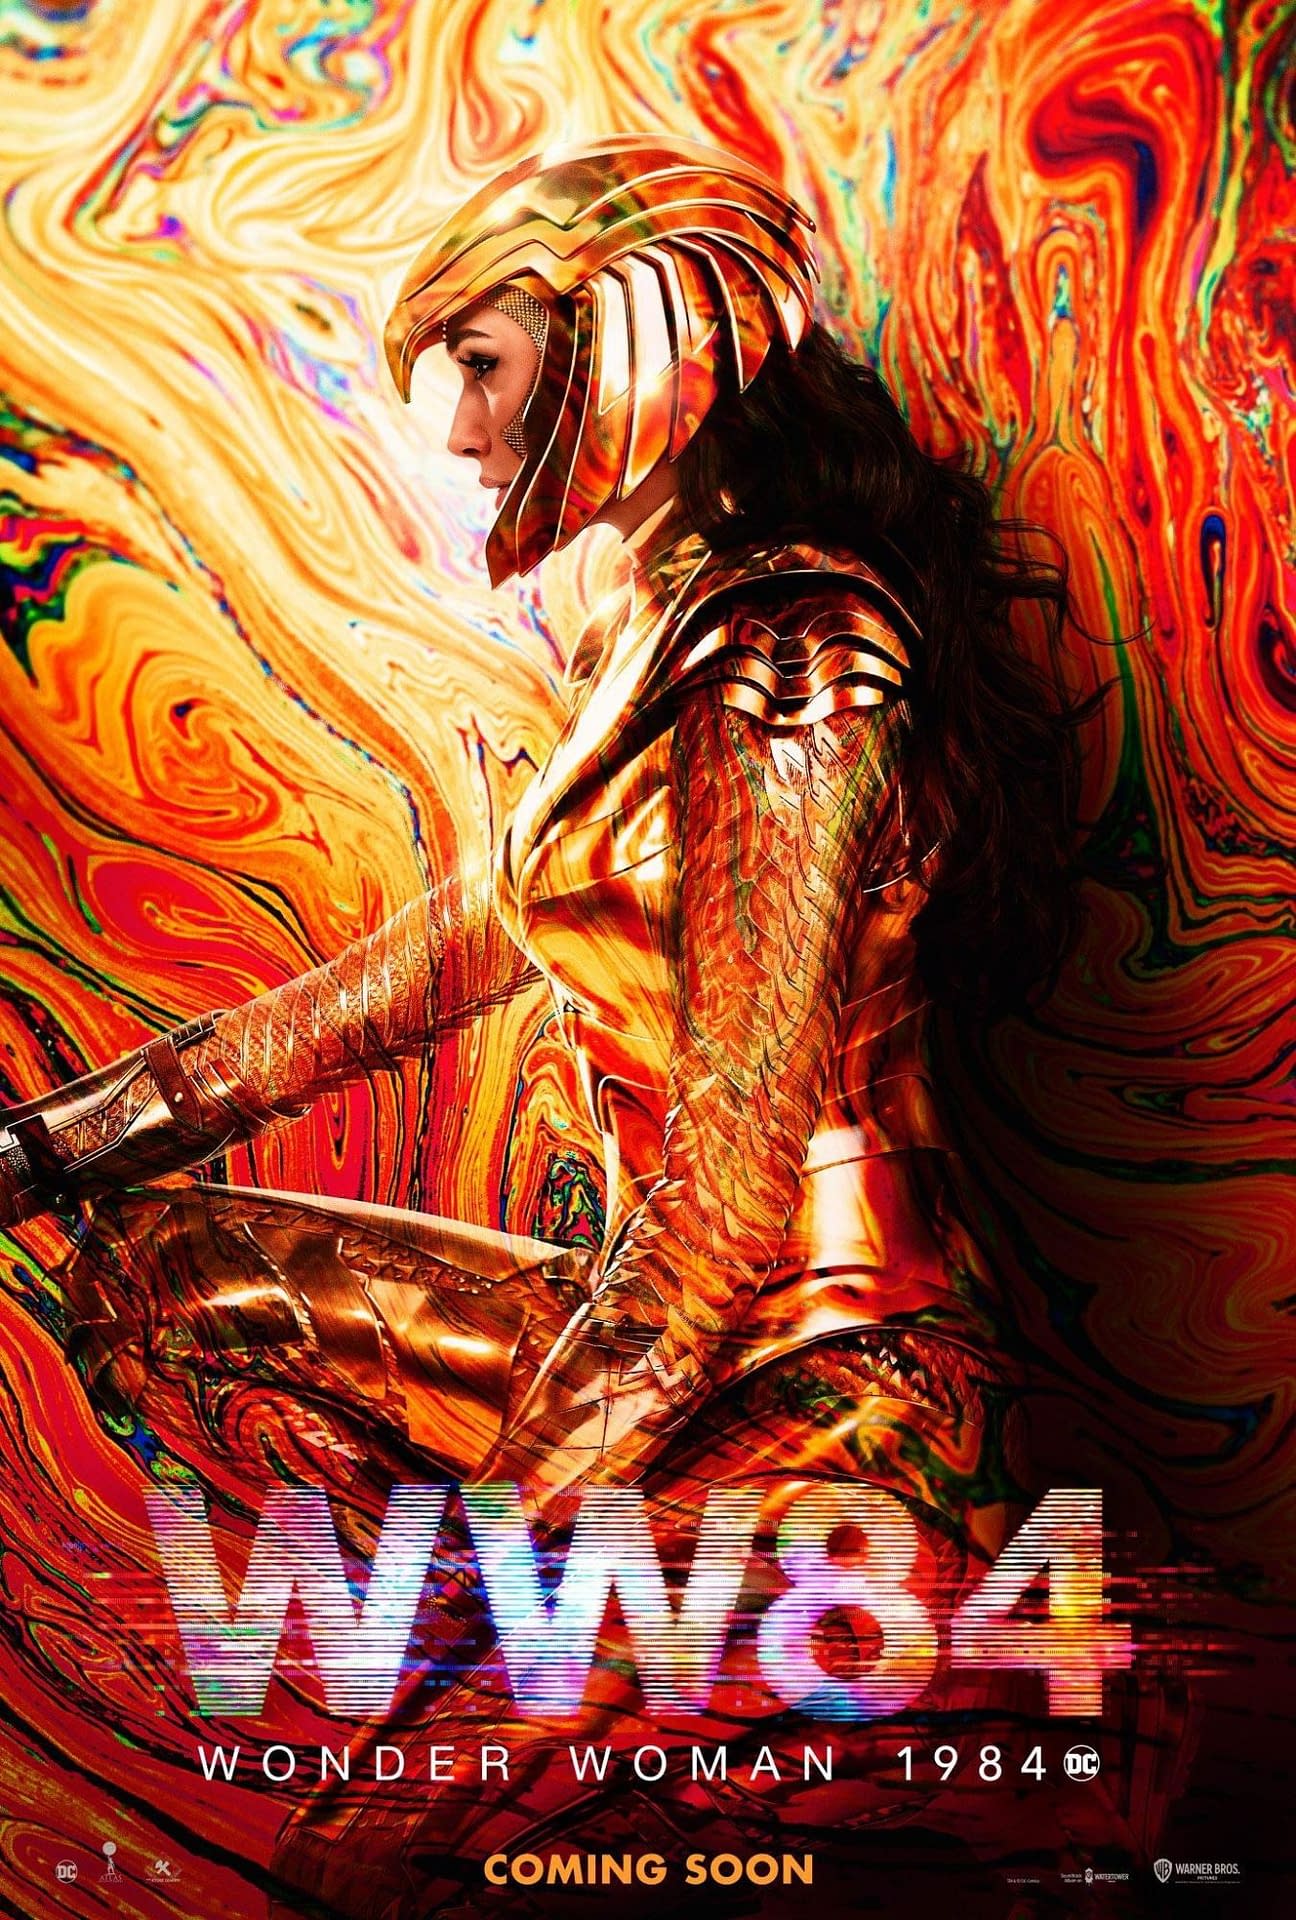 New "Wonder Woman 1984" Poster is Golden and Psychedelic